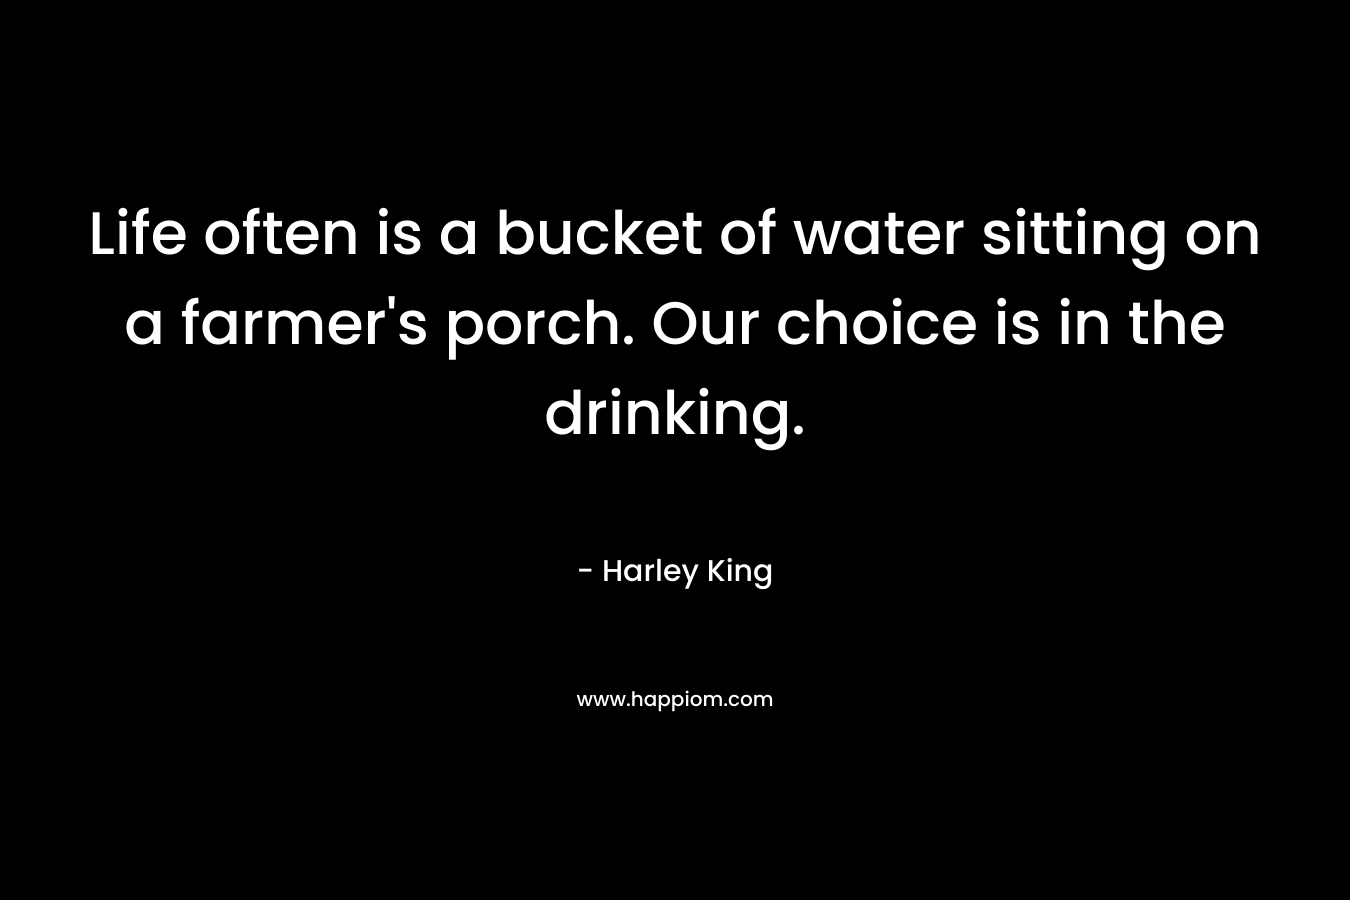 Life often is a bucket of water sitting on a farmer’s porch. Our choice is in the drinking. – Harley King